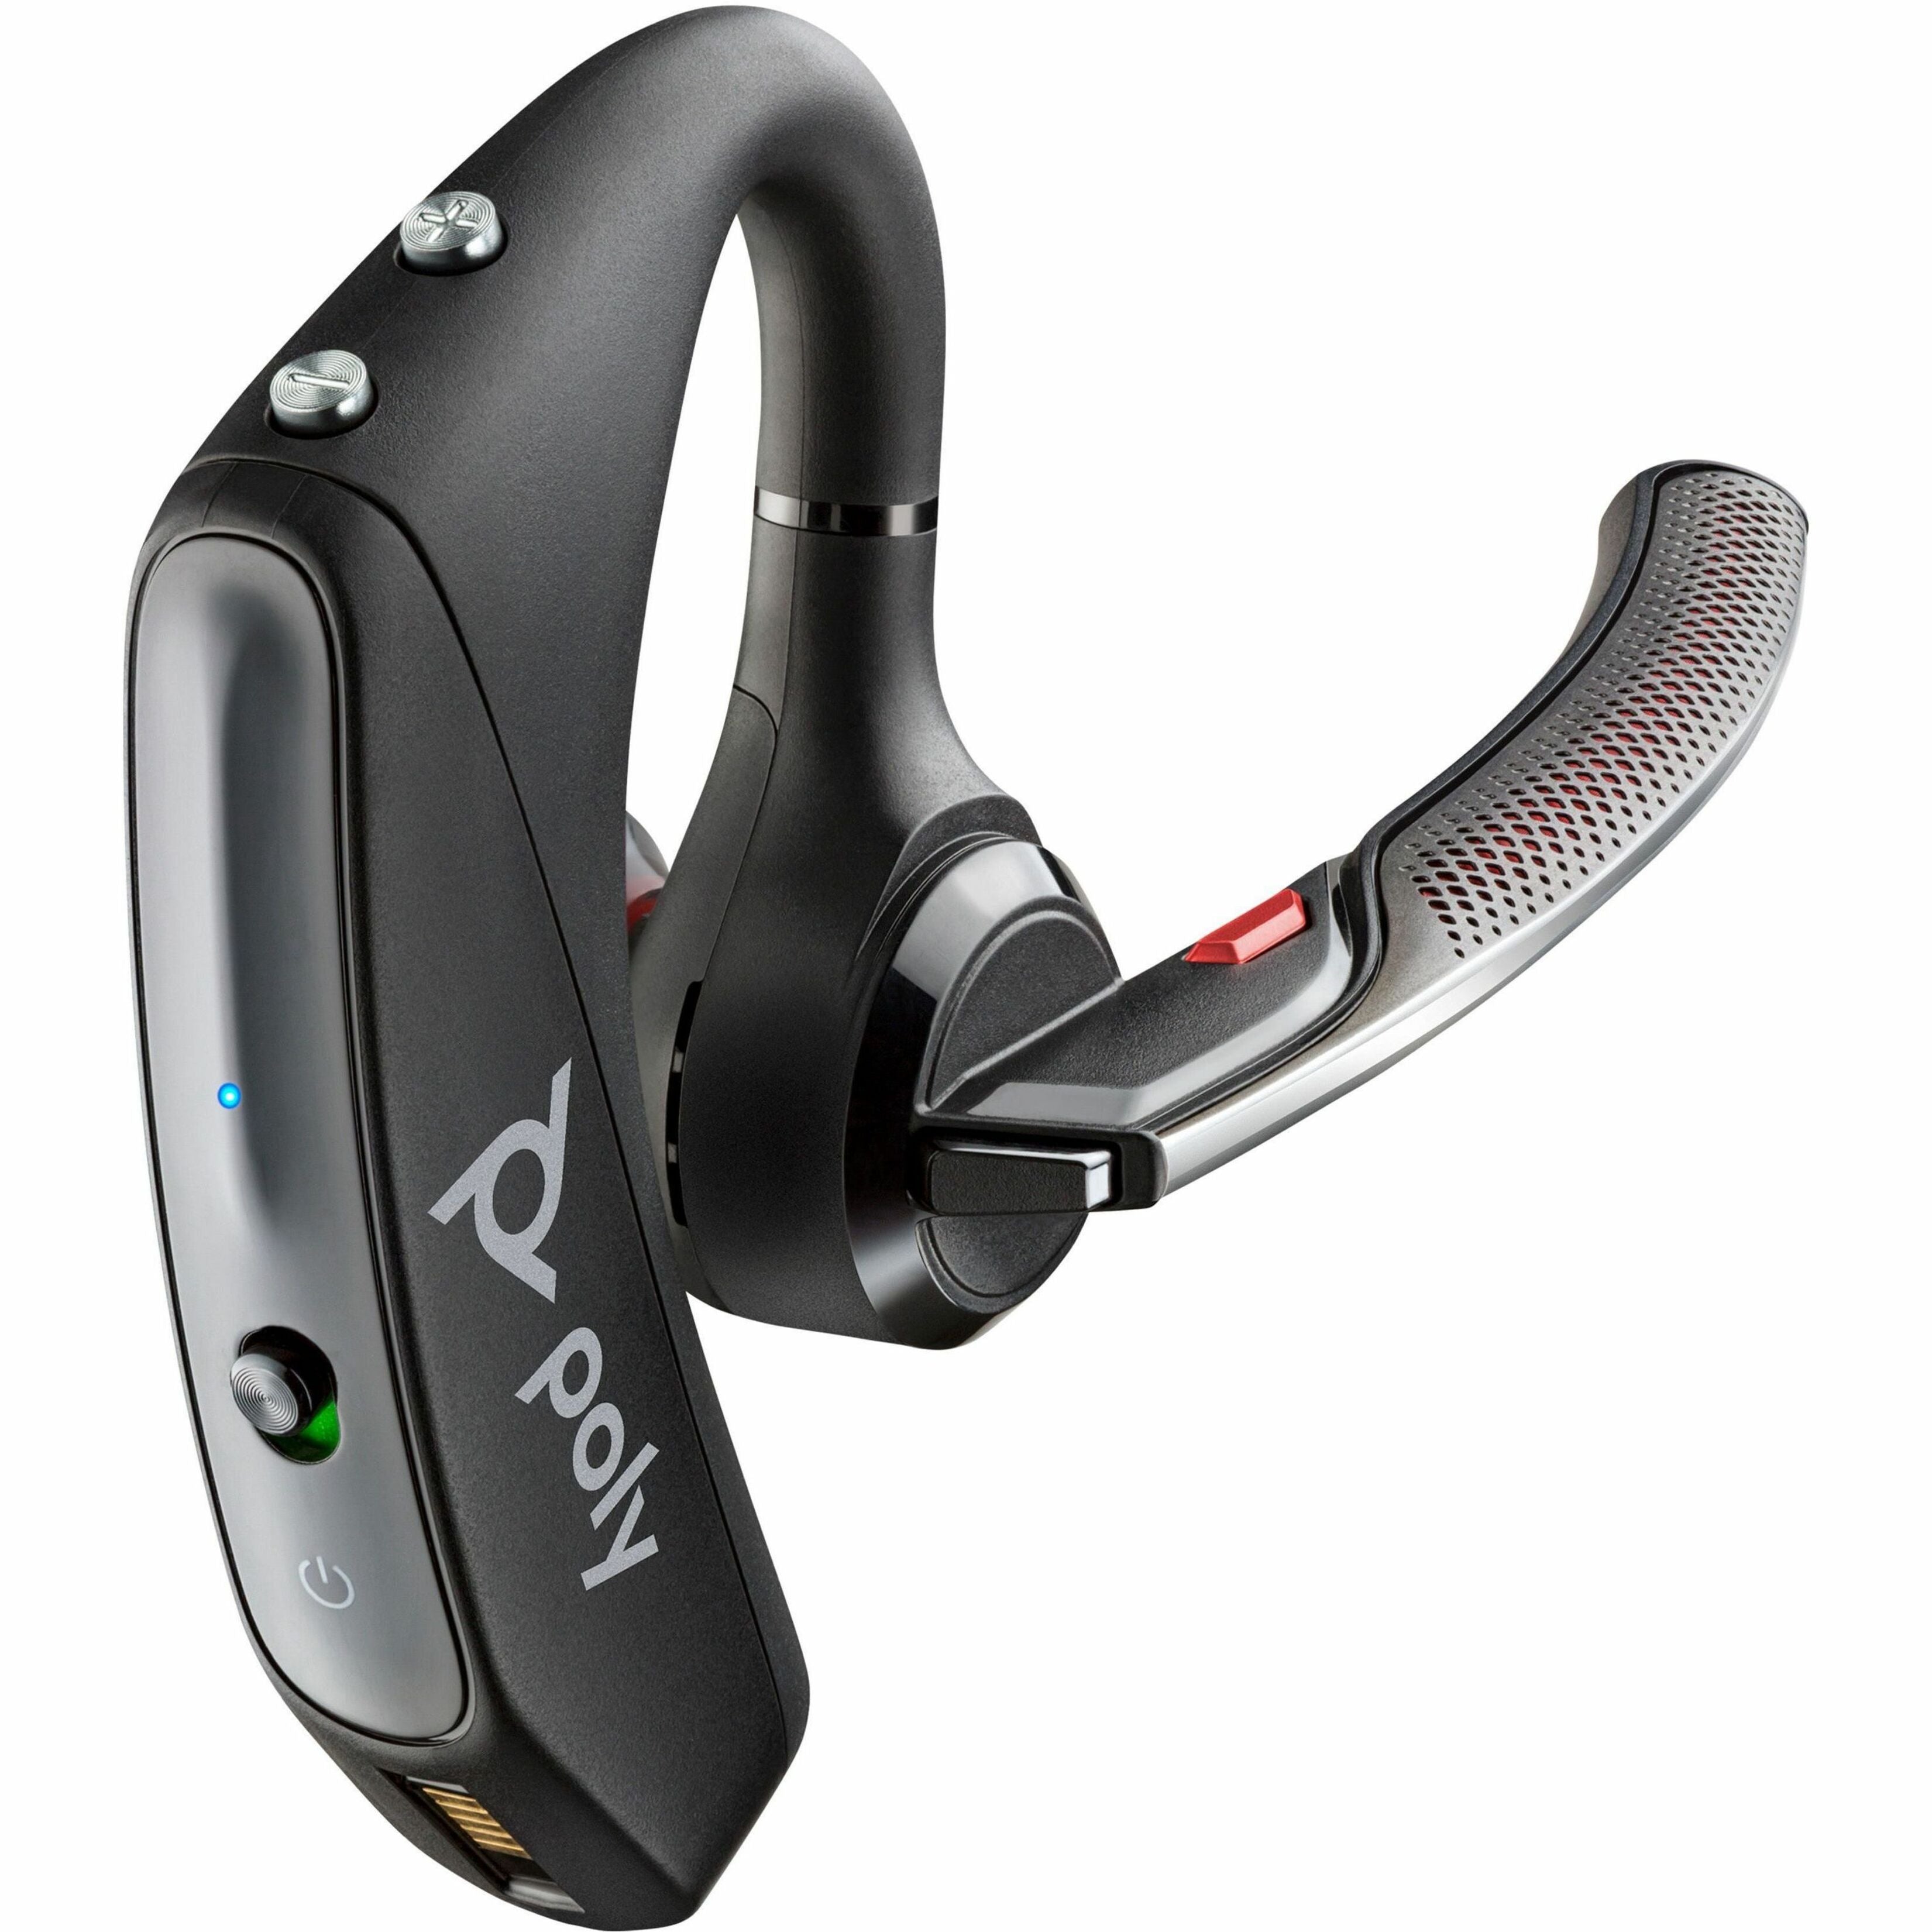 Poly 7K2F3AA Voyager 5200 UC USB-A Bluetooth Headset +BT700 Adapter Noise Cancelling Rechargeable Battery Wideband Audio 